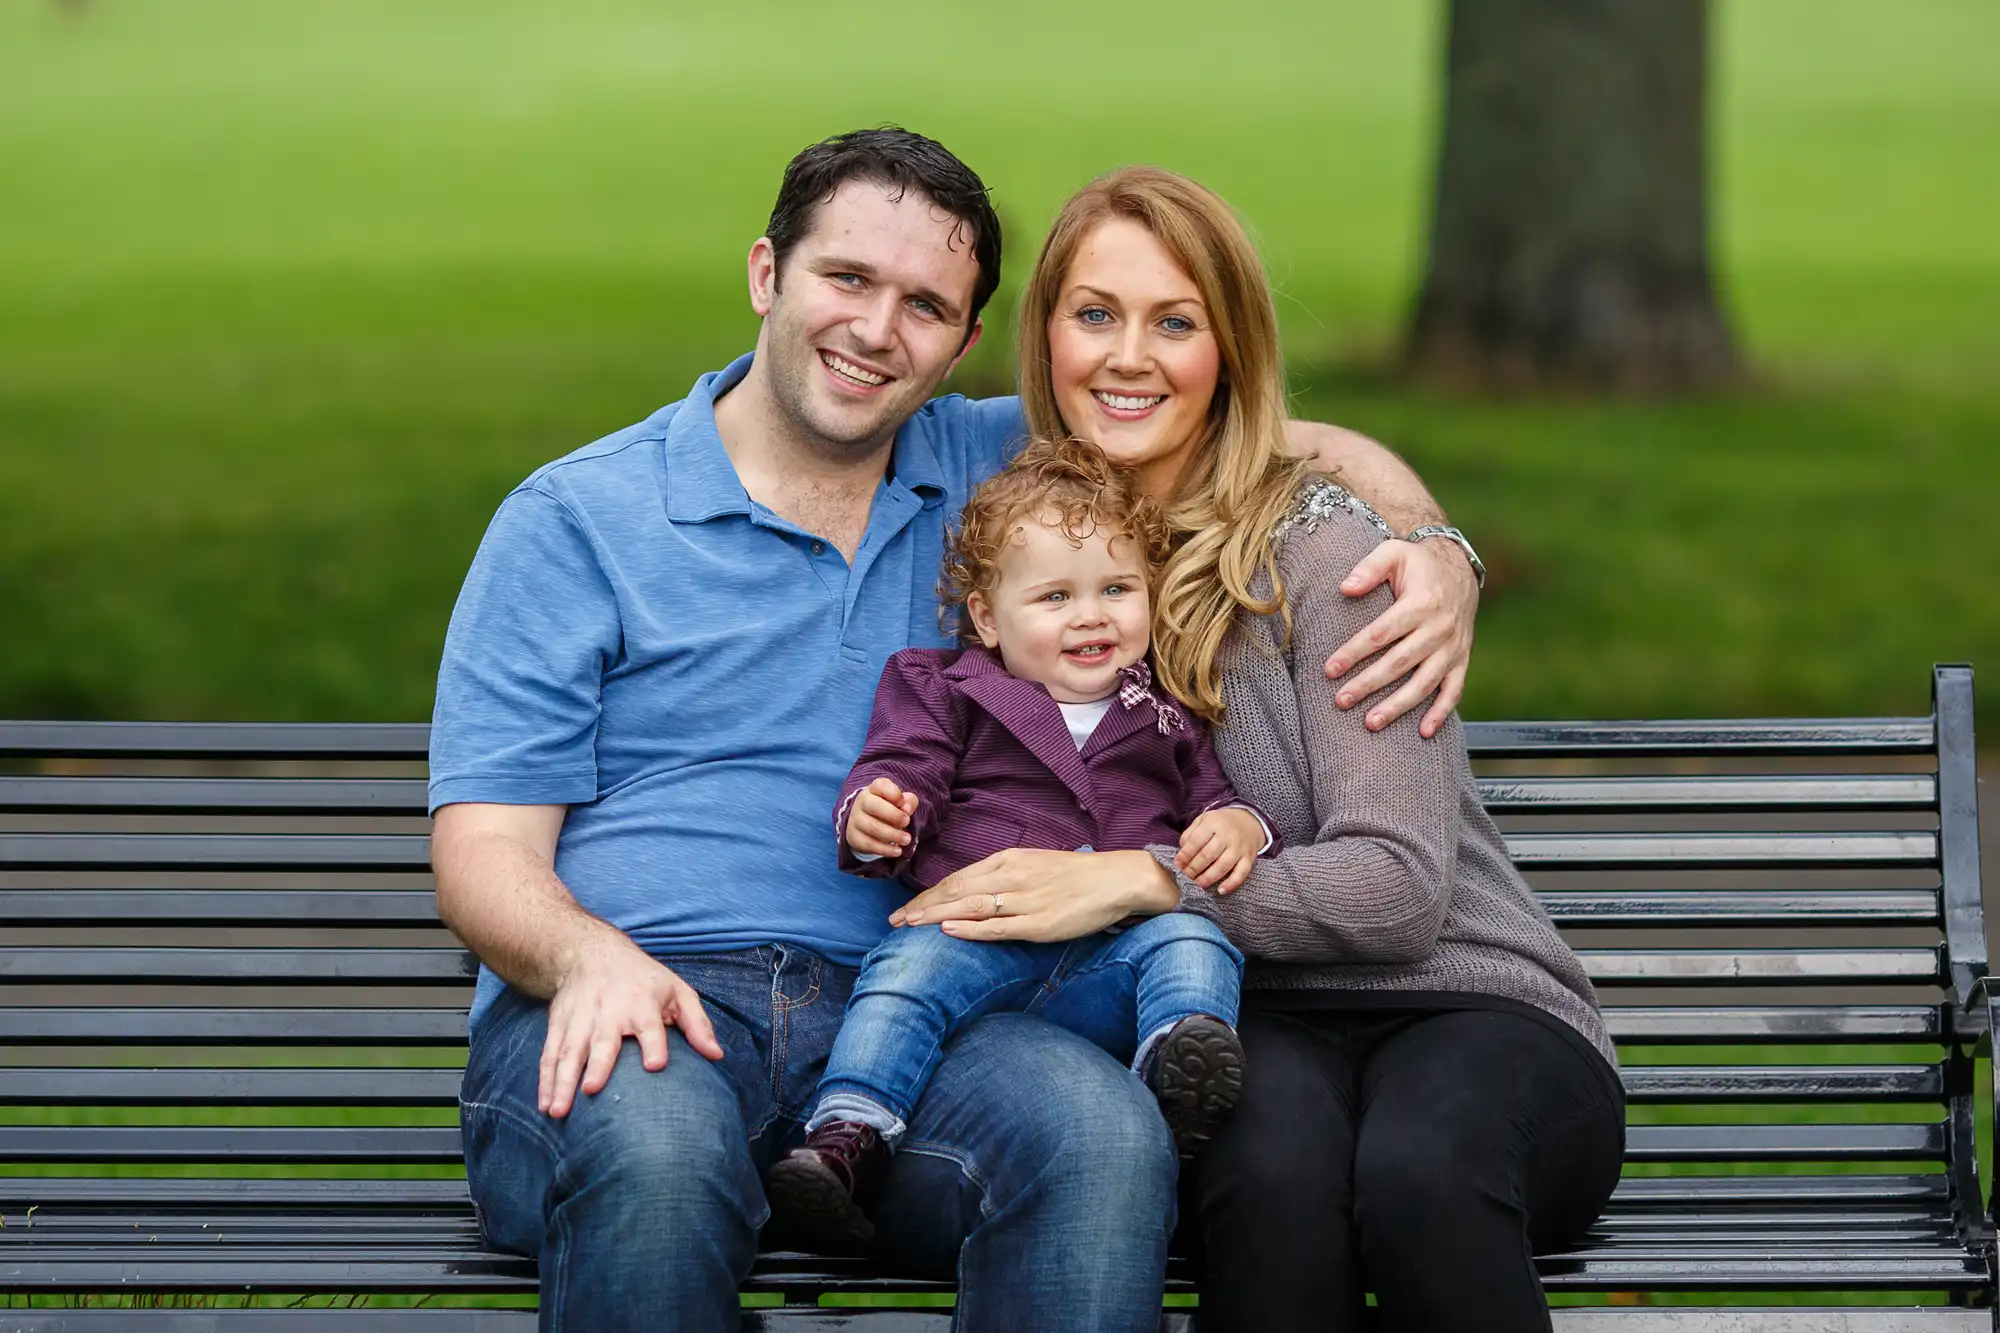 A happy family of three, with a man, a woman, and a young child, smiling and sitting closely together on a park bench.